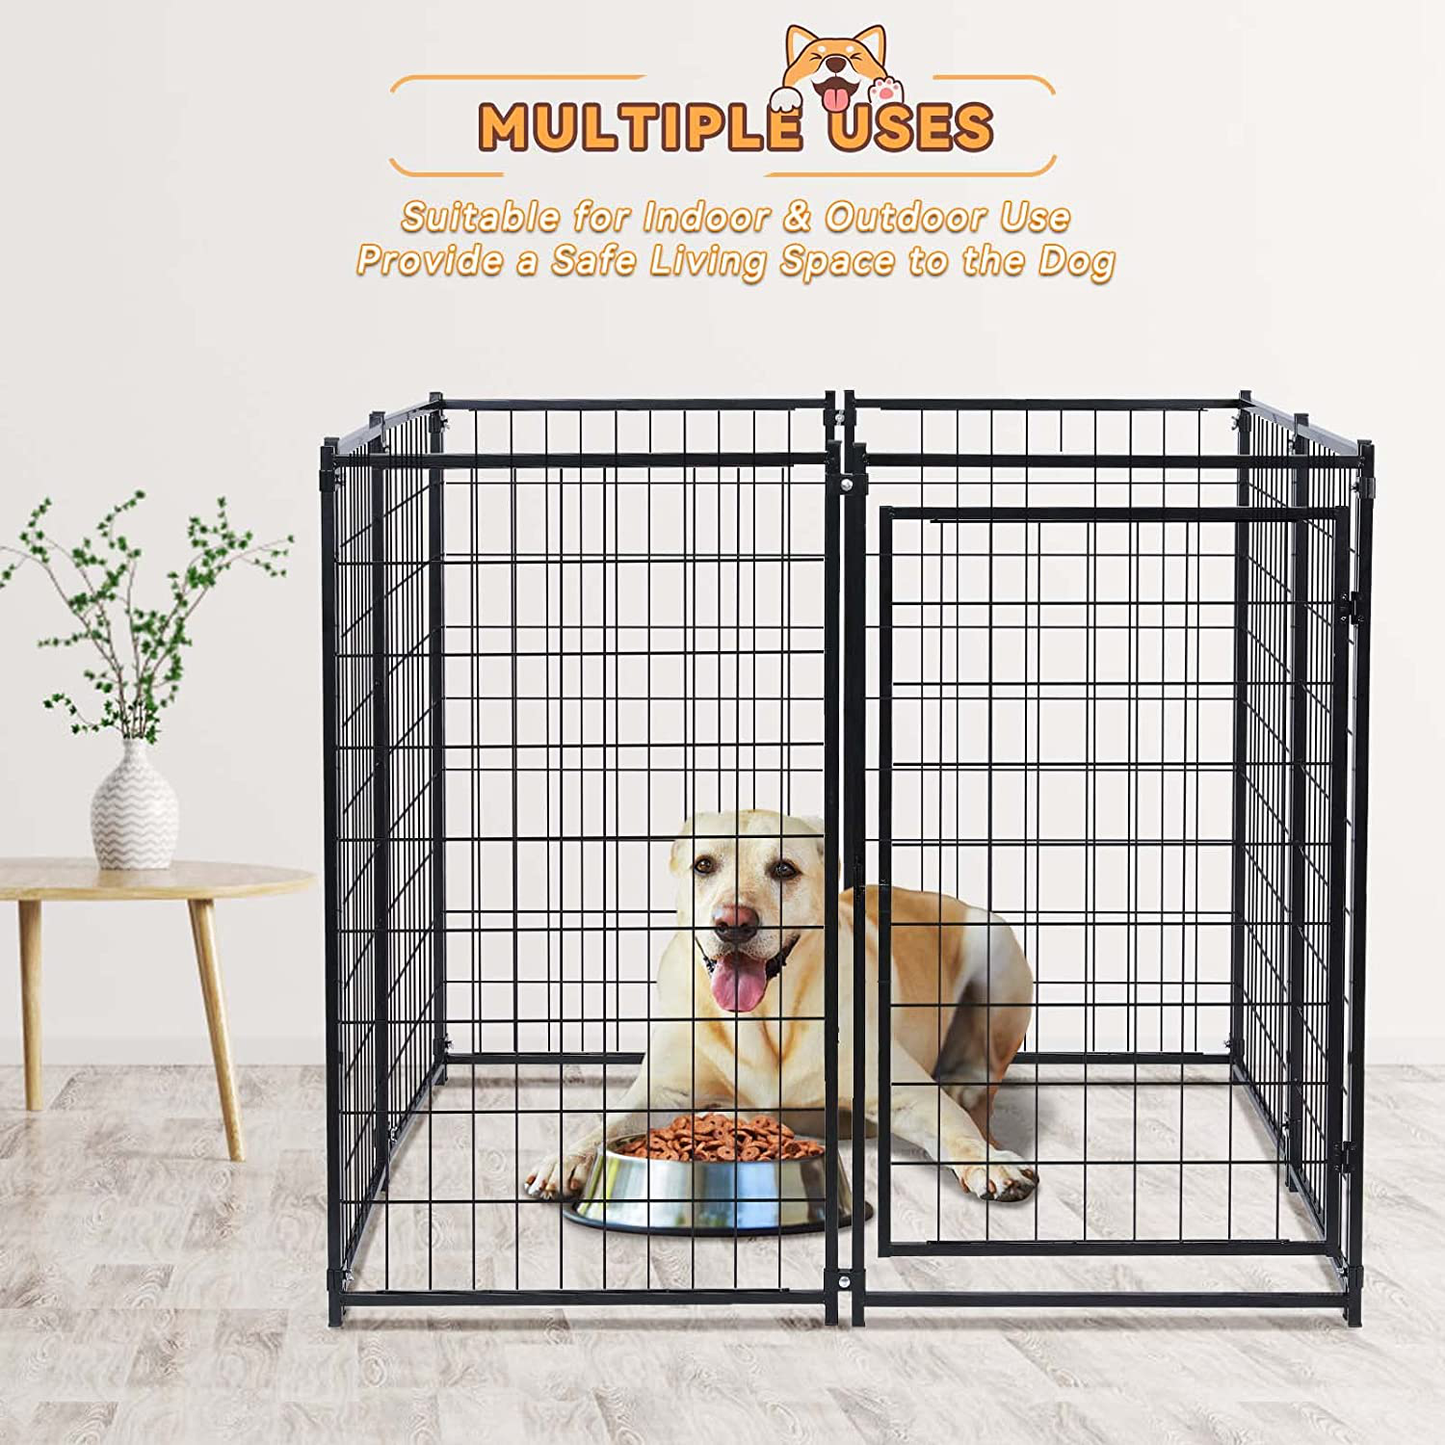 TOOCAPRO Large Dog Kennel 4Ft X 4.2Ft X 4.45Ft Dog Crate Cage Heavy Duty Metal Dog House Large Pet Playpen with Uv-Proof Waterproof Cover Roof & Invisible Lock for Large to Small Dog Outdoor/Indoor Use Animals & Pet Supplies > Pet Supplies > Dog Supplies > Dog Kennels & Runs TOOCAPRO   